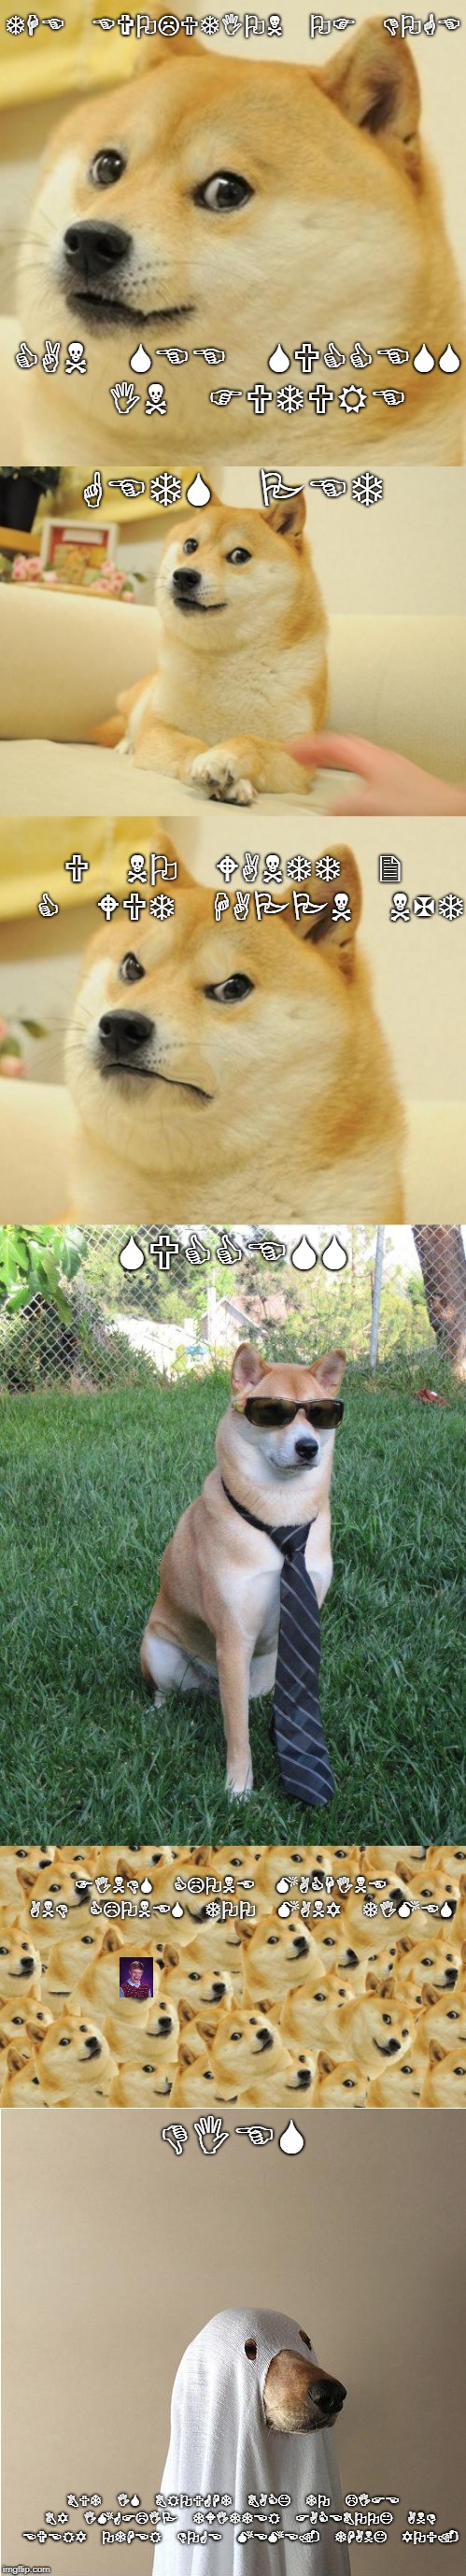 THE EVOLUTION OF DOGE; CAN SEE SUCCESS IN FUTURE; GETS PET; U NO WANTT 2 C WUT HAPPN NXT; SUCCESS; FINDS CLONE MACHINE AND CLONES TOO MANY TIMES; DIES; BUT IS BROUGHT BACK TO LIFE BY IMGFLIP TWITTER FACEBOOK AND EVERY OTHER DOGE MEME. THANK YOU. | image tagged in doge,evoloution,imgflip | made w/ Imgflip meme maker